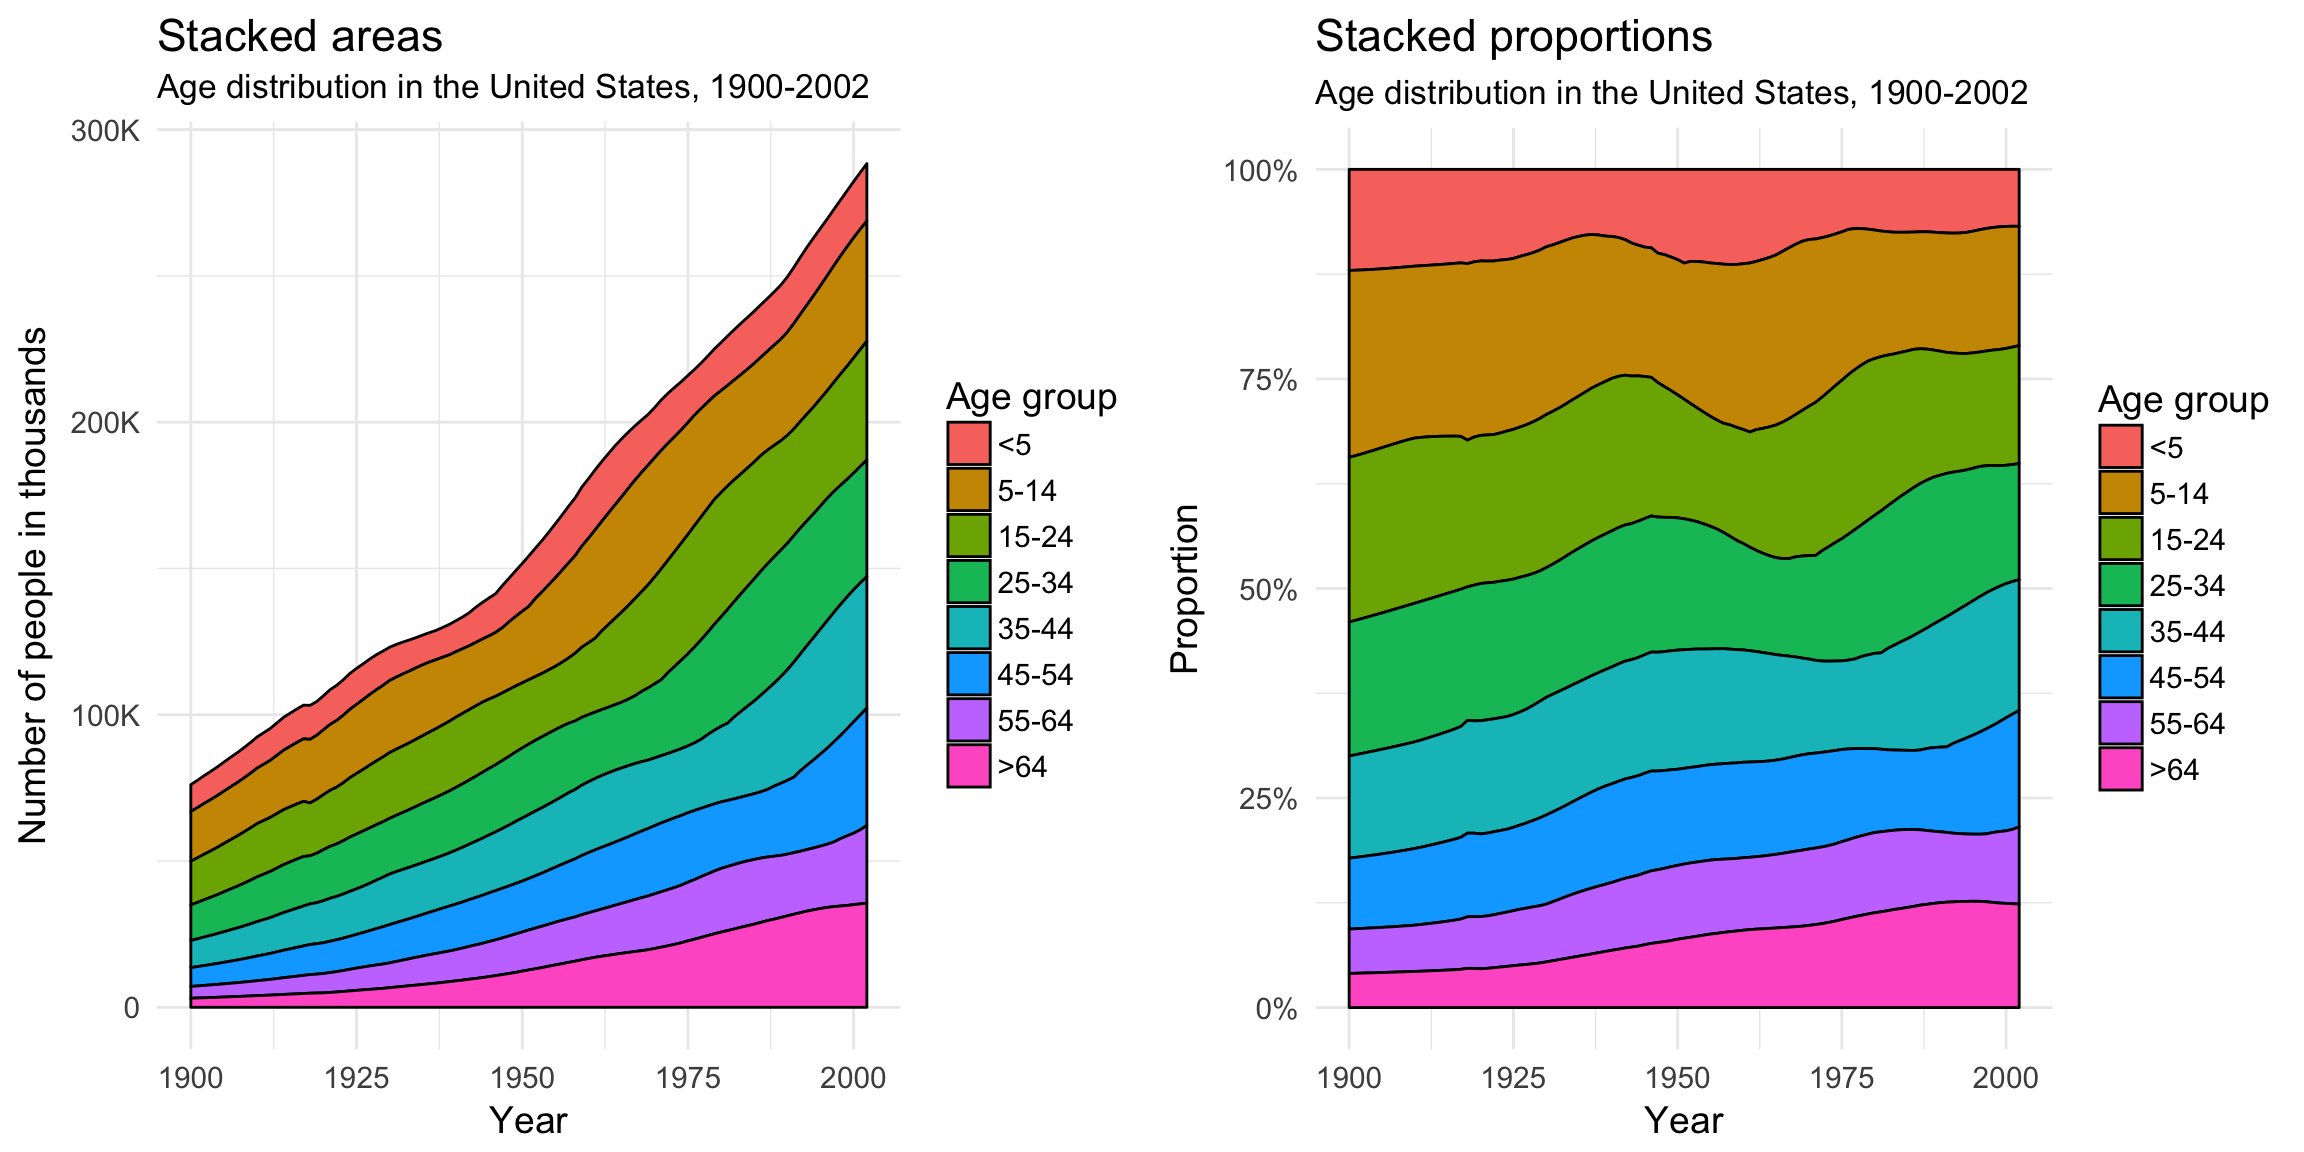 Beginning with 1925, the number of people over the age of 64 has increased dramatically, especially after 1975.